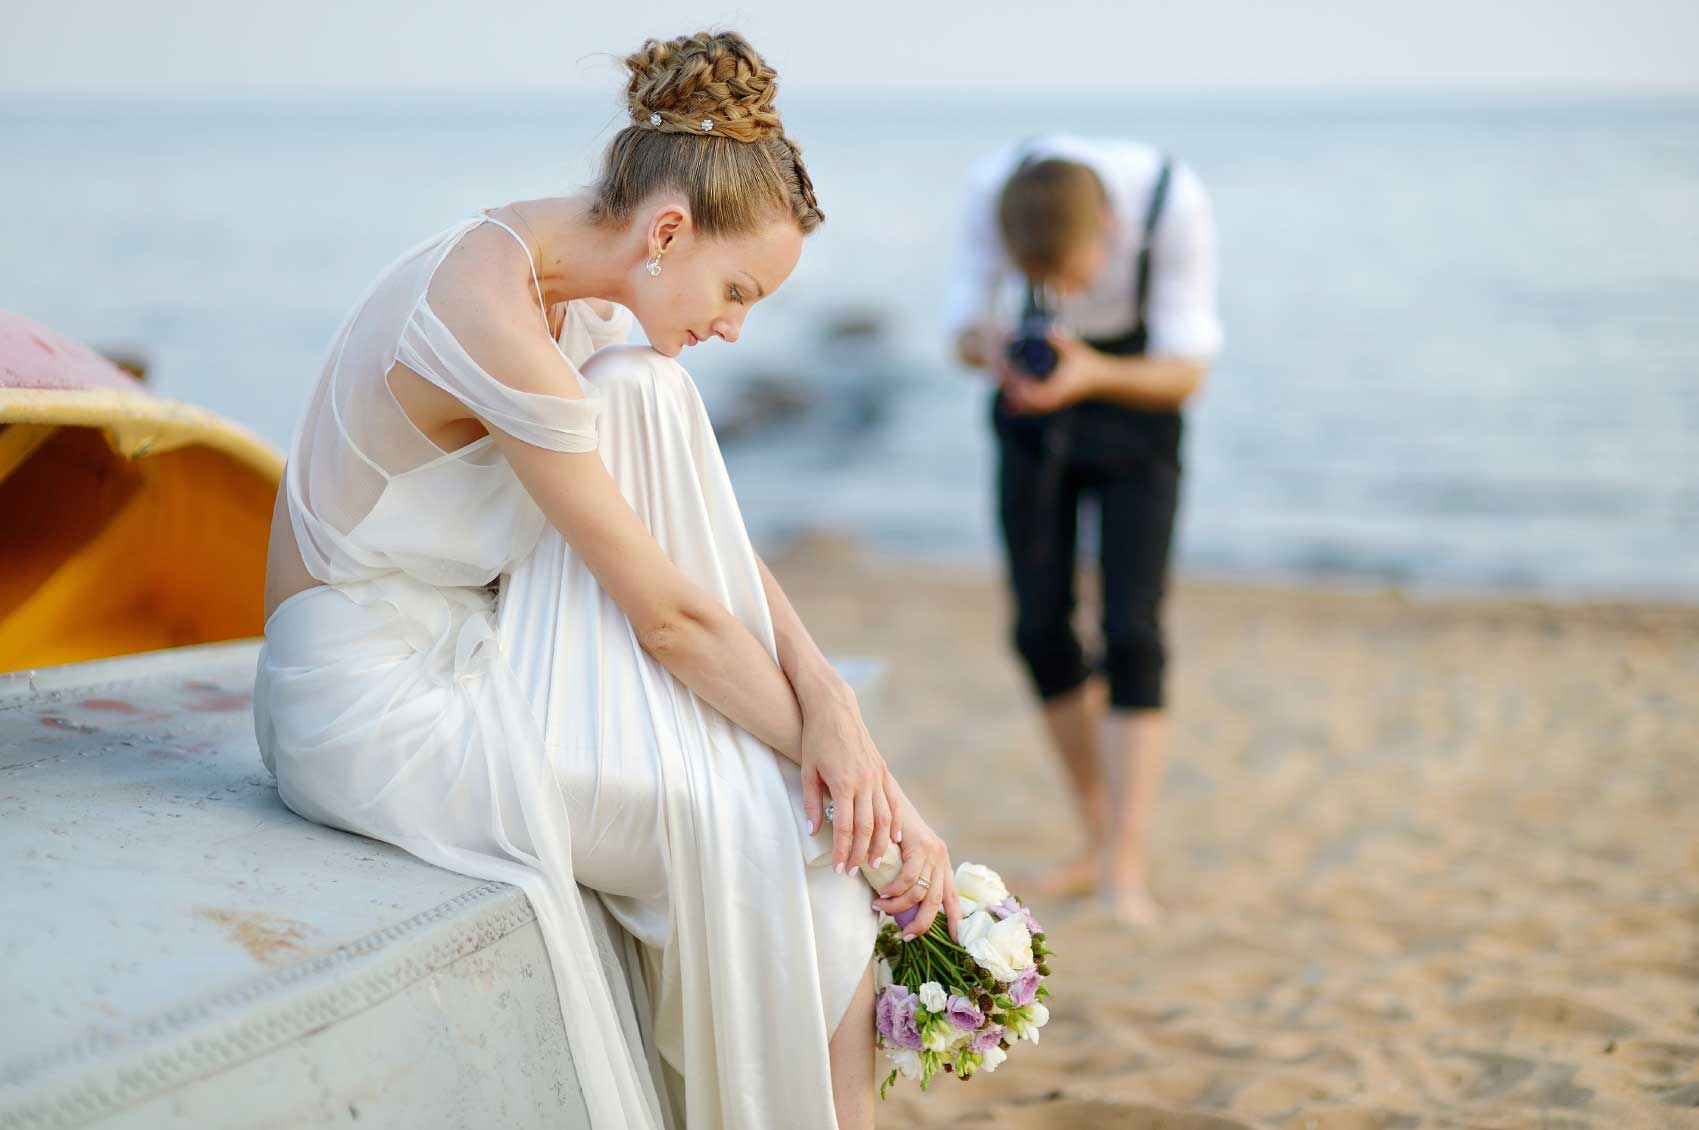 15 questions for your wedding photographer